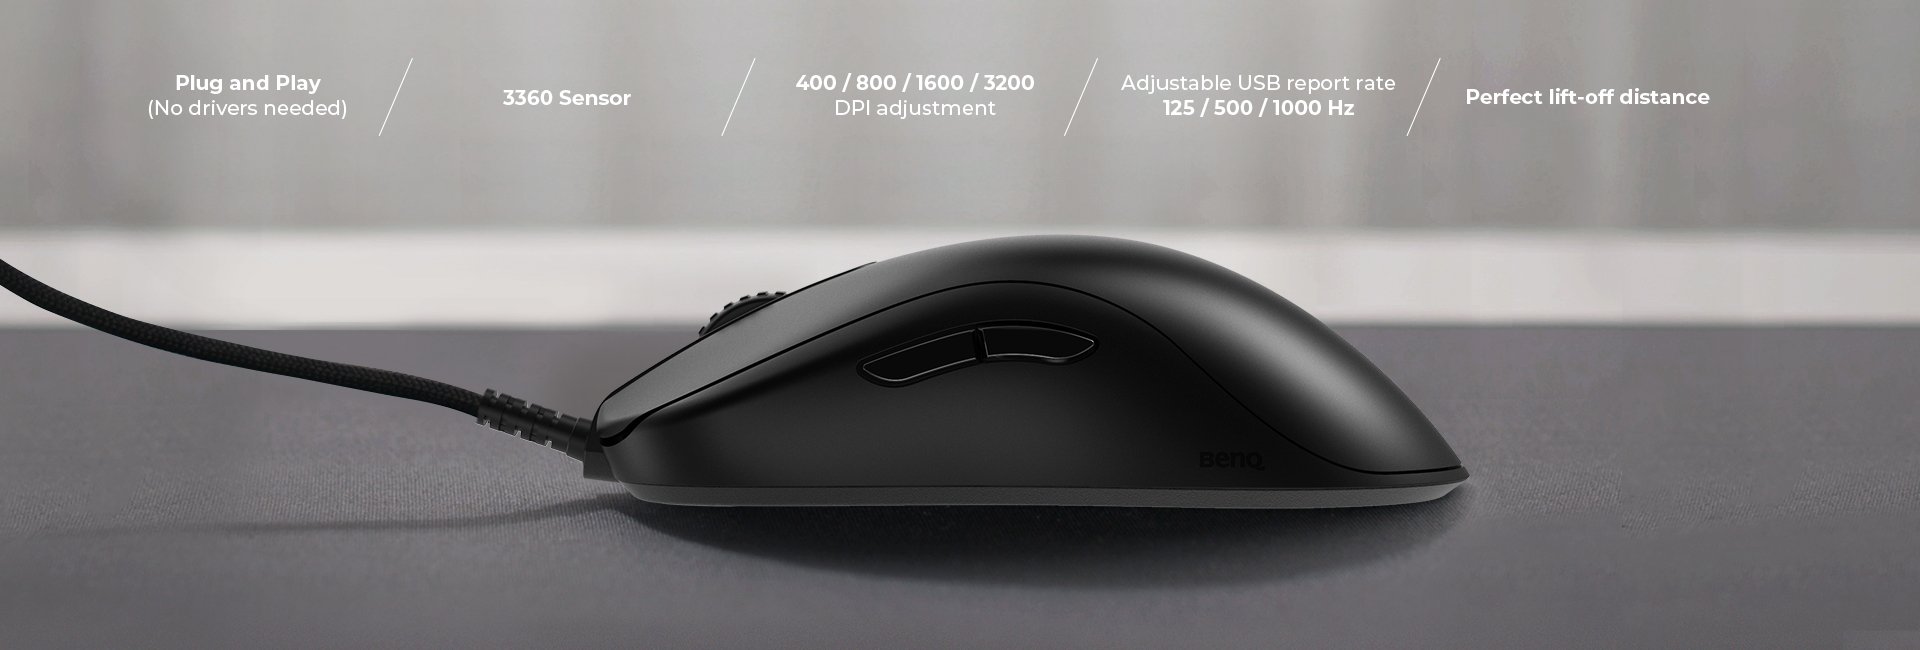 zowie-esports-gaming-mouse-fk1plus-c-plug-and-play-3360-sensor-dpi-adjustment-adjustable-usb-report-rate-perfect-lift-off-distance